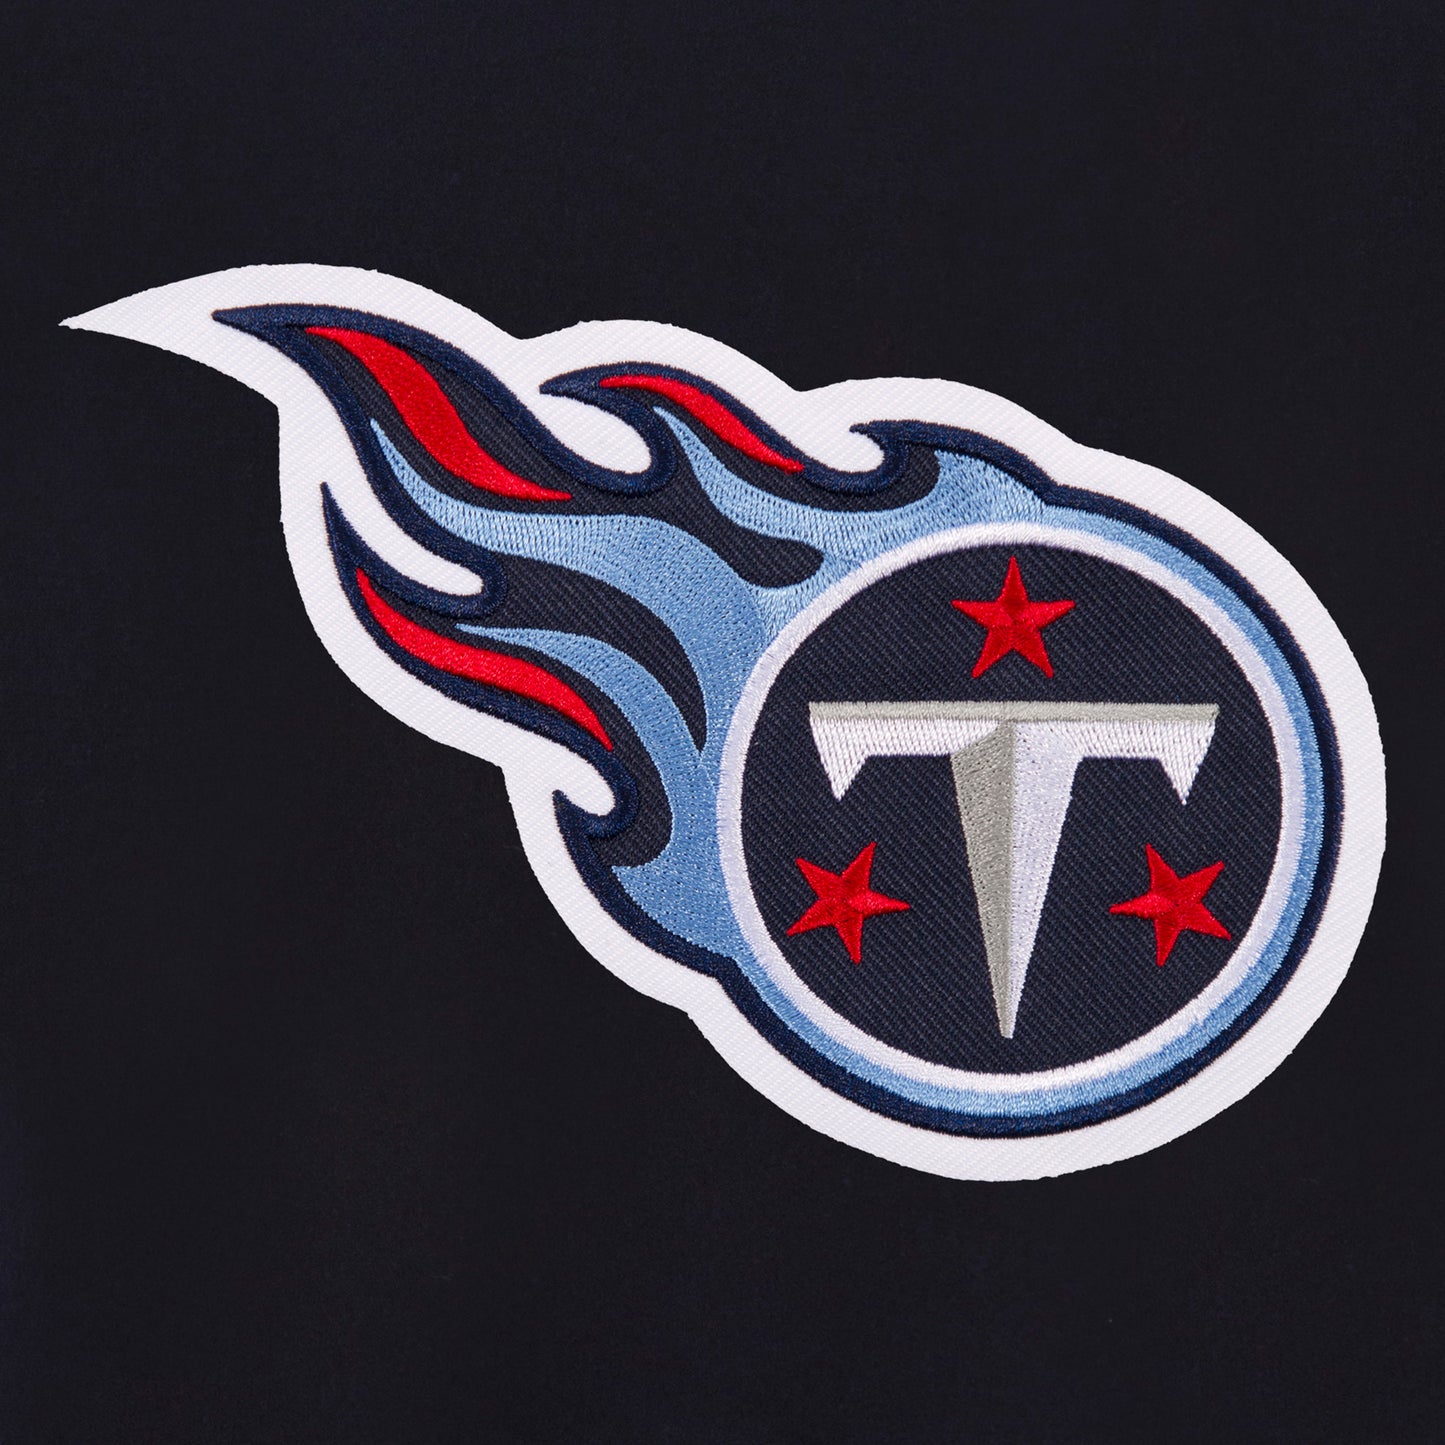 Tennessee Titans All Wool Jacket